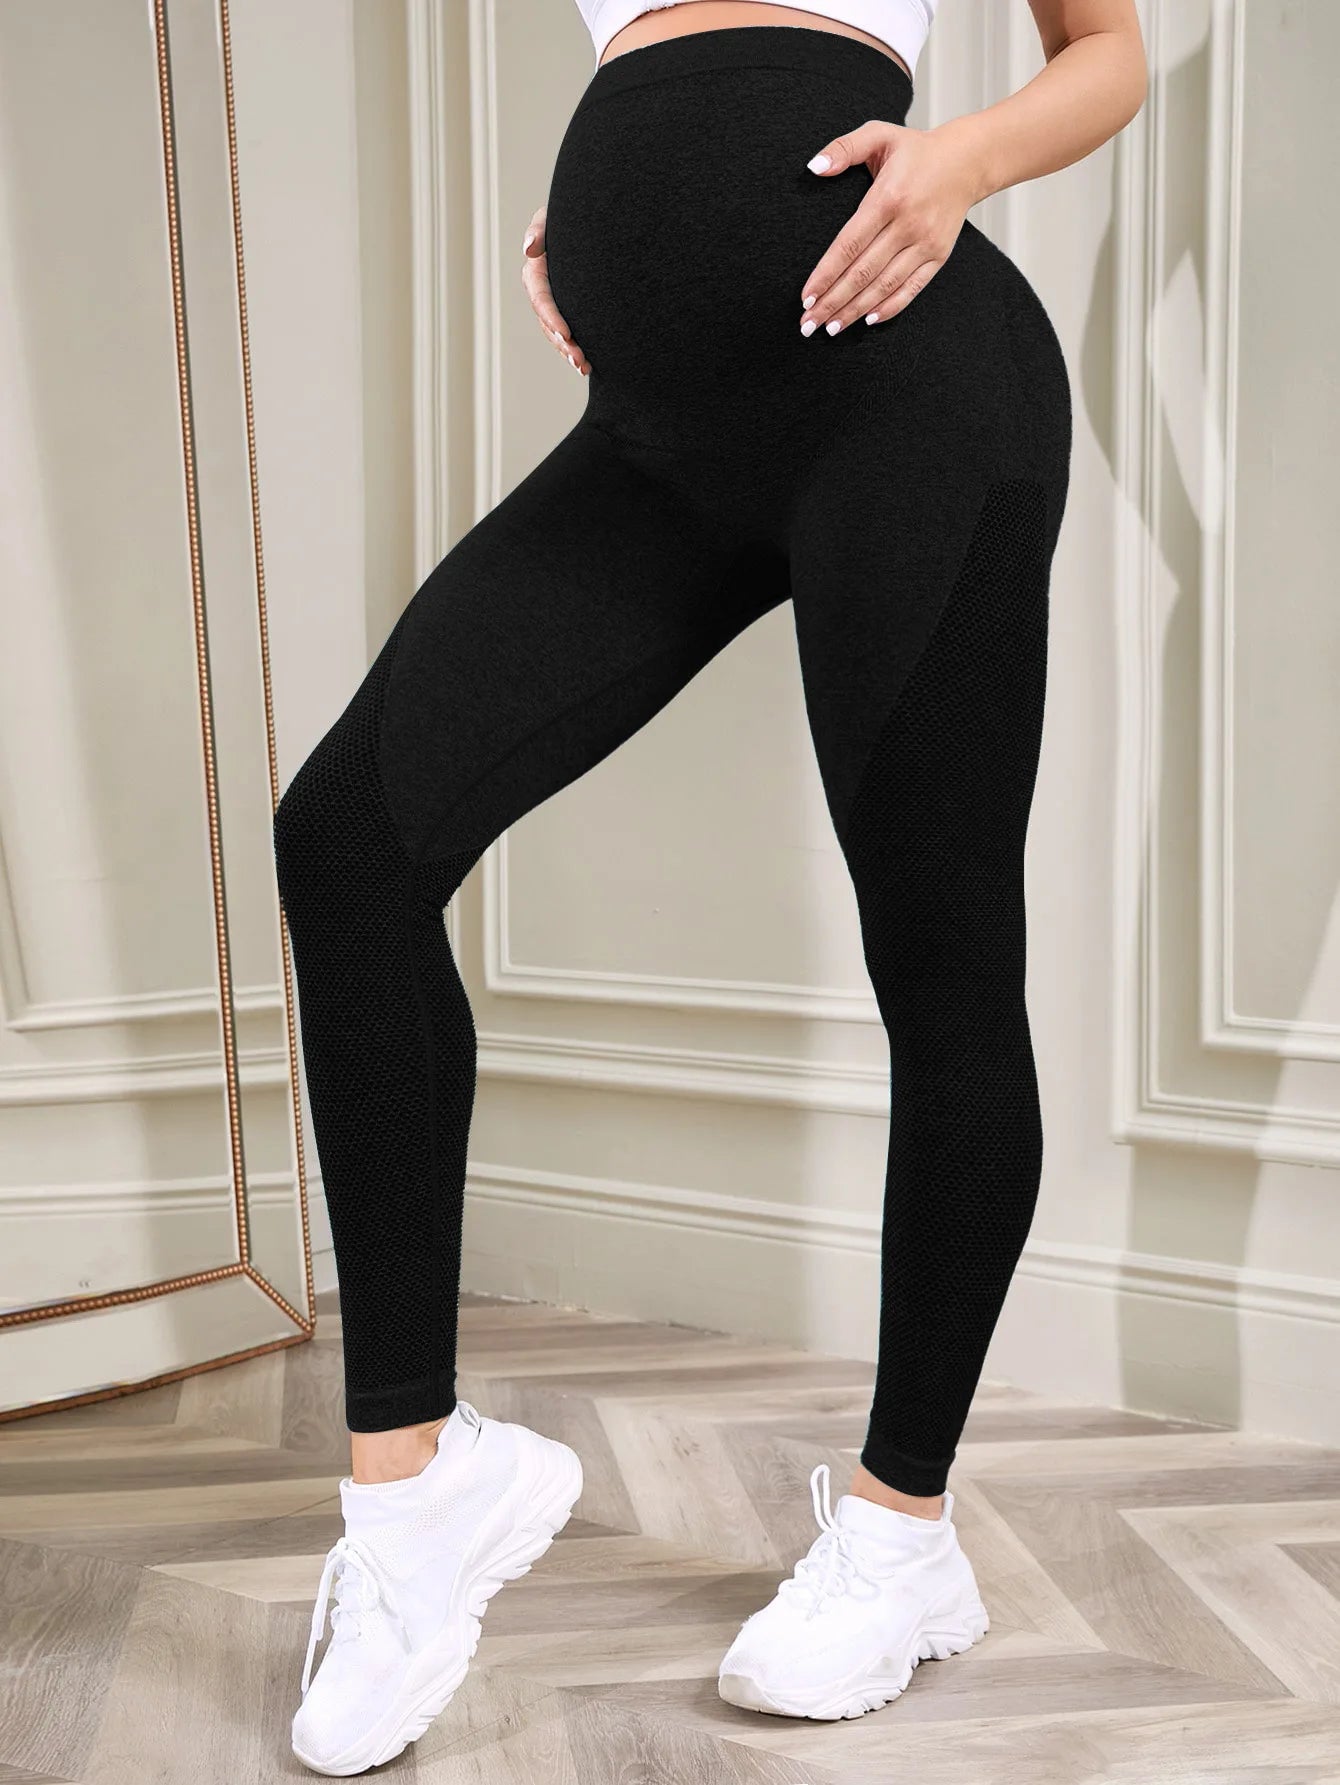 Maternity Leggings | Over-the-Belly Support | Full-Length Yoga & Workout Pants